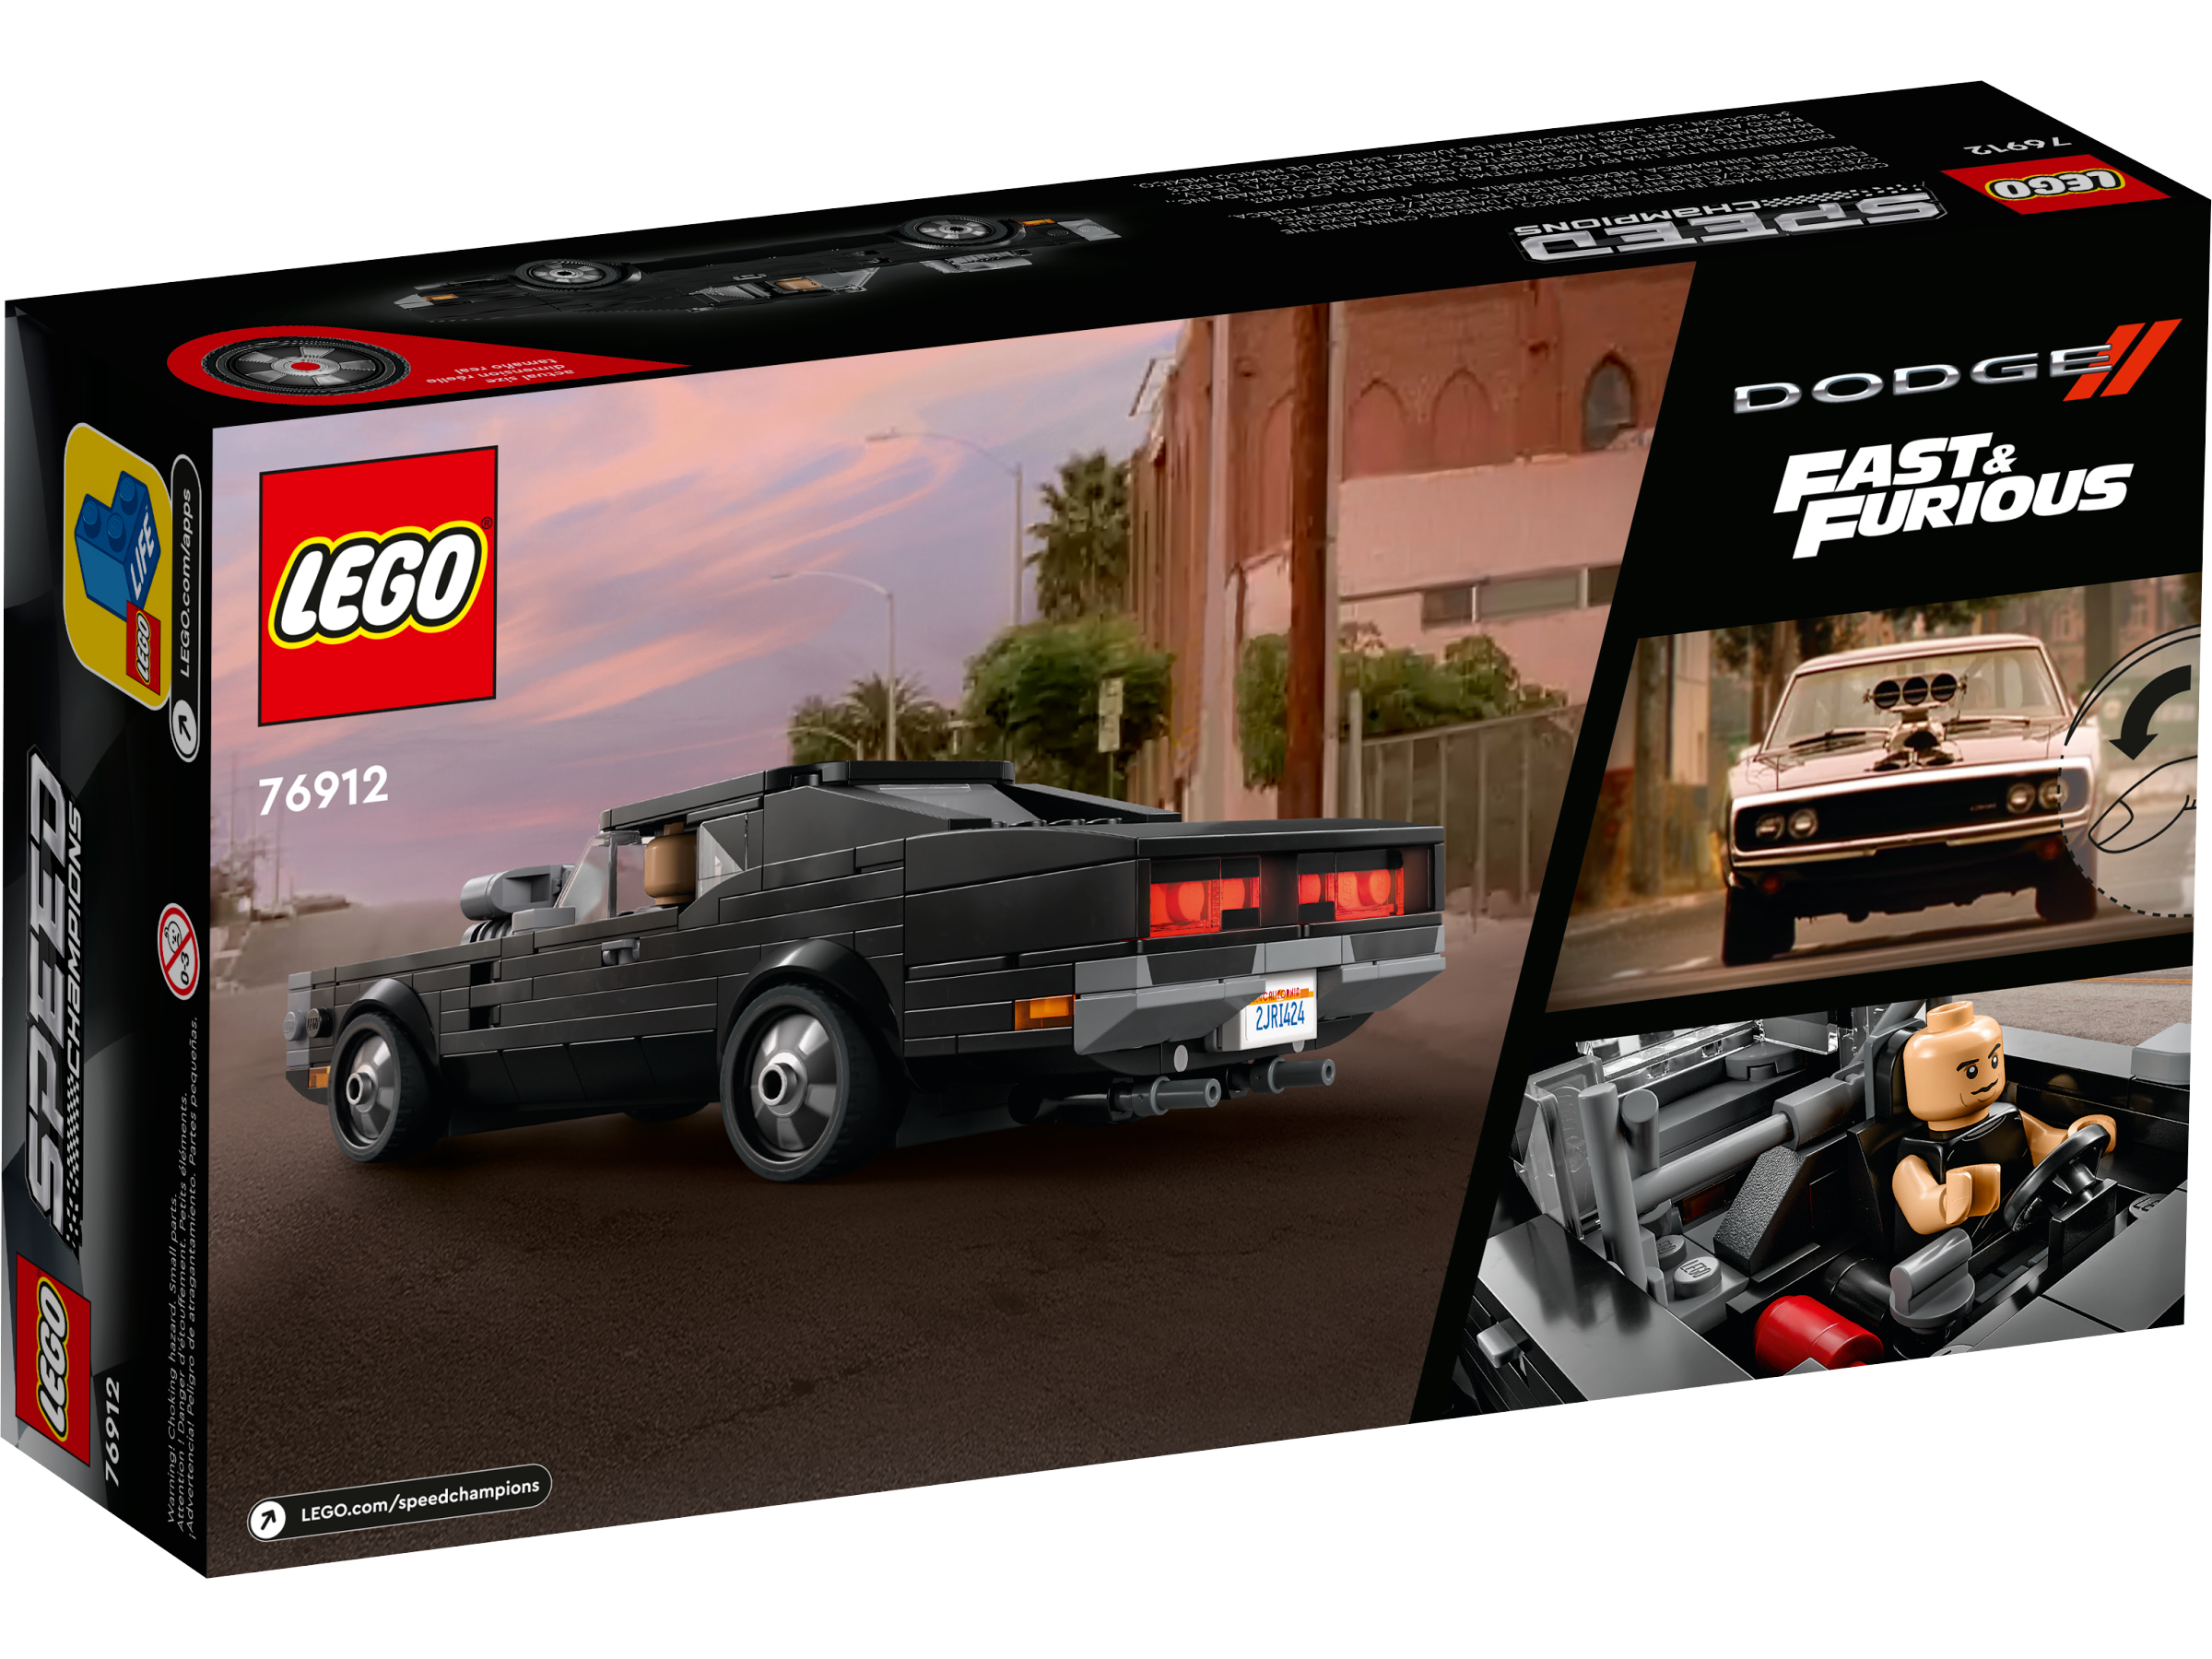 Lego Speed Champions 76912 - Dodge Charger R/T Fast & Furious